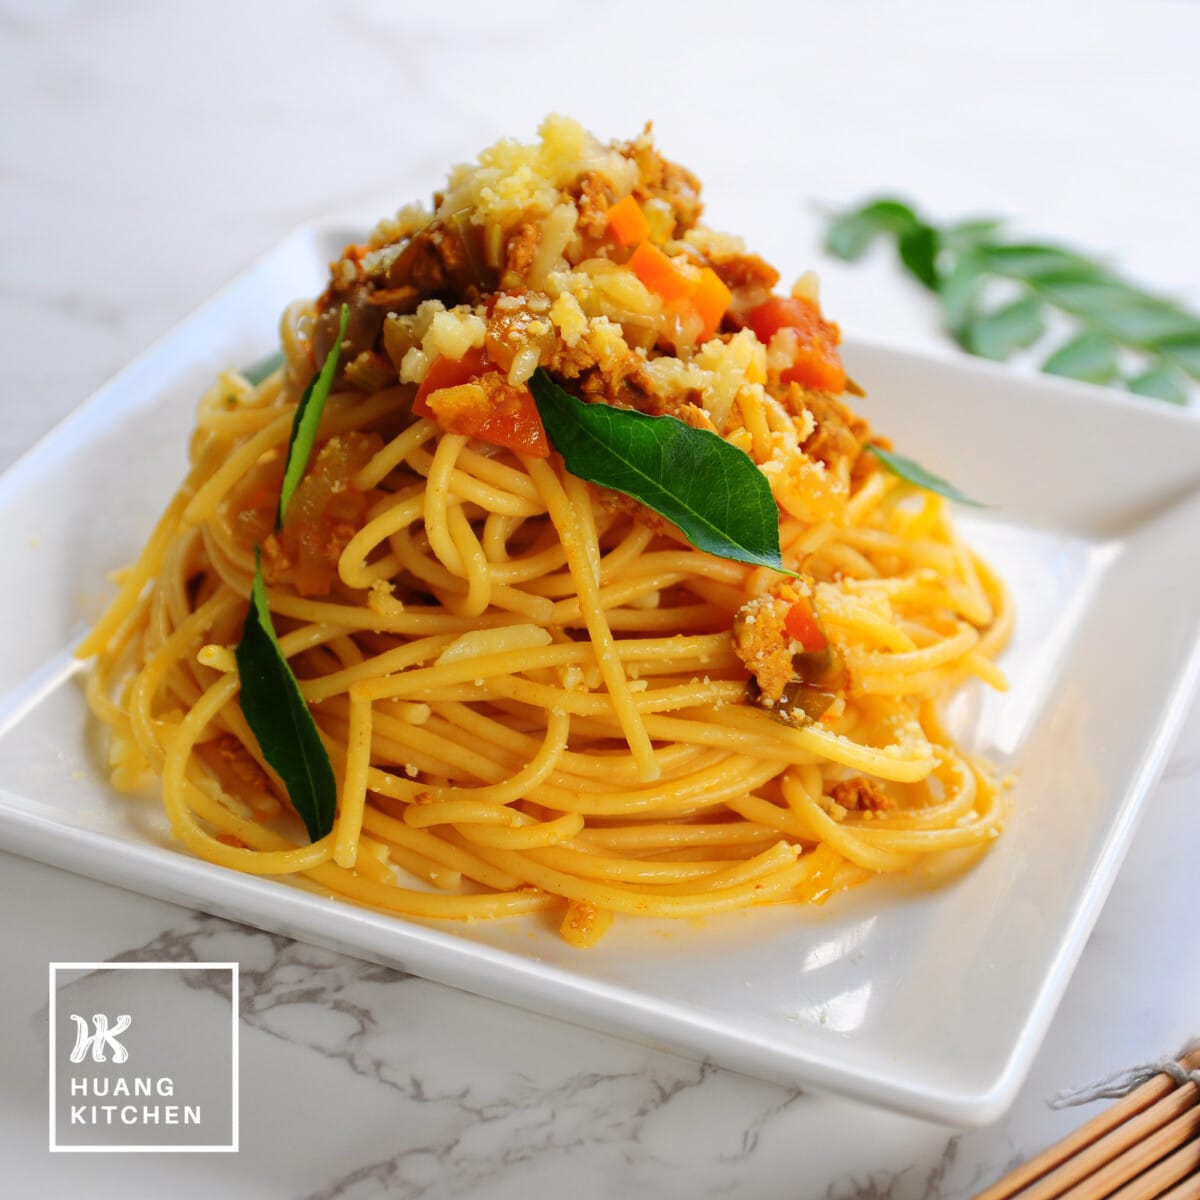 Spaghetti with Curry Meat Sauce (Malaysian Style Bolognese Pasta) Recipe by Huang Kitchen - Square photo of pasta in square plate white background